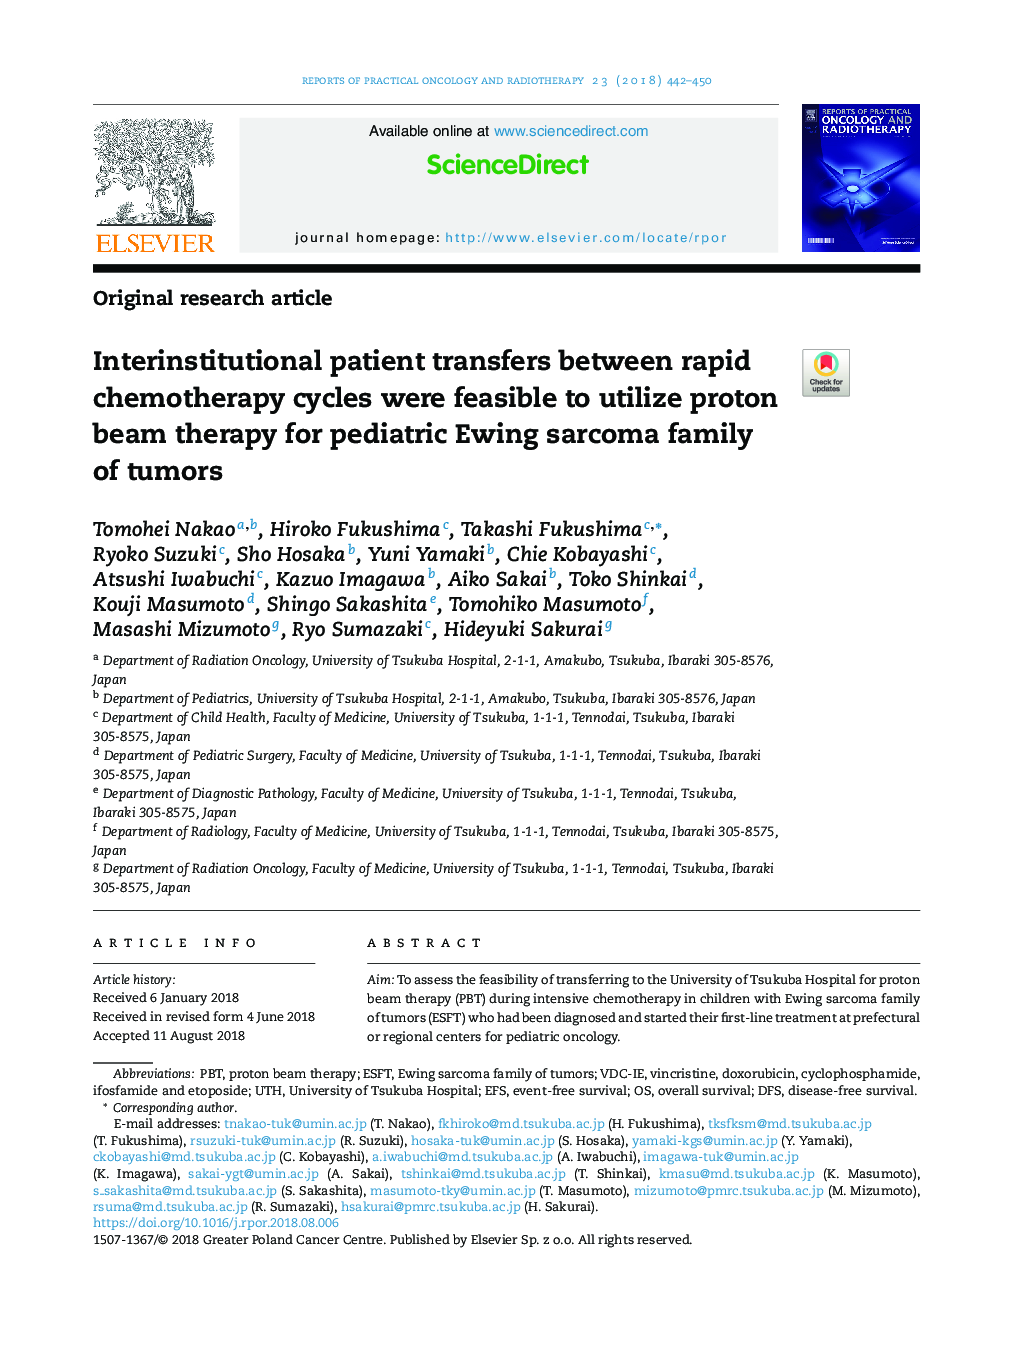 Interinstitutional patient transfers between rapid chemotherapy cycles were feasible to utilize proton beam therapy for pediatric Ewing sarcoma family of tumors